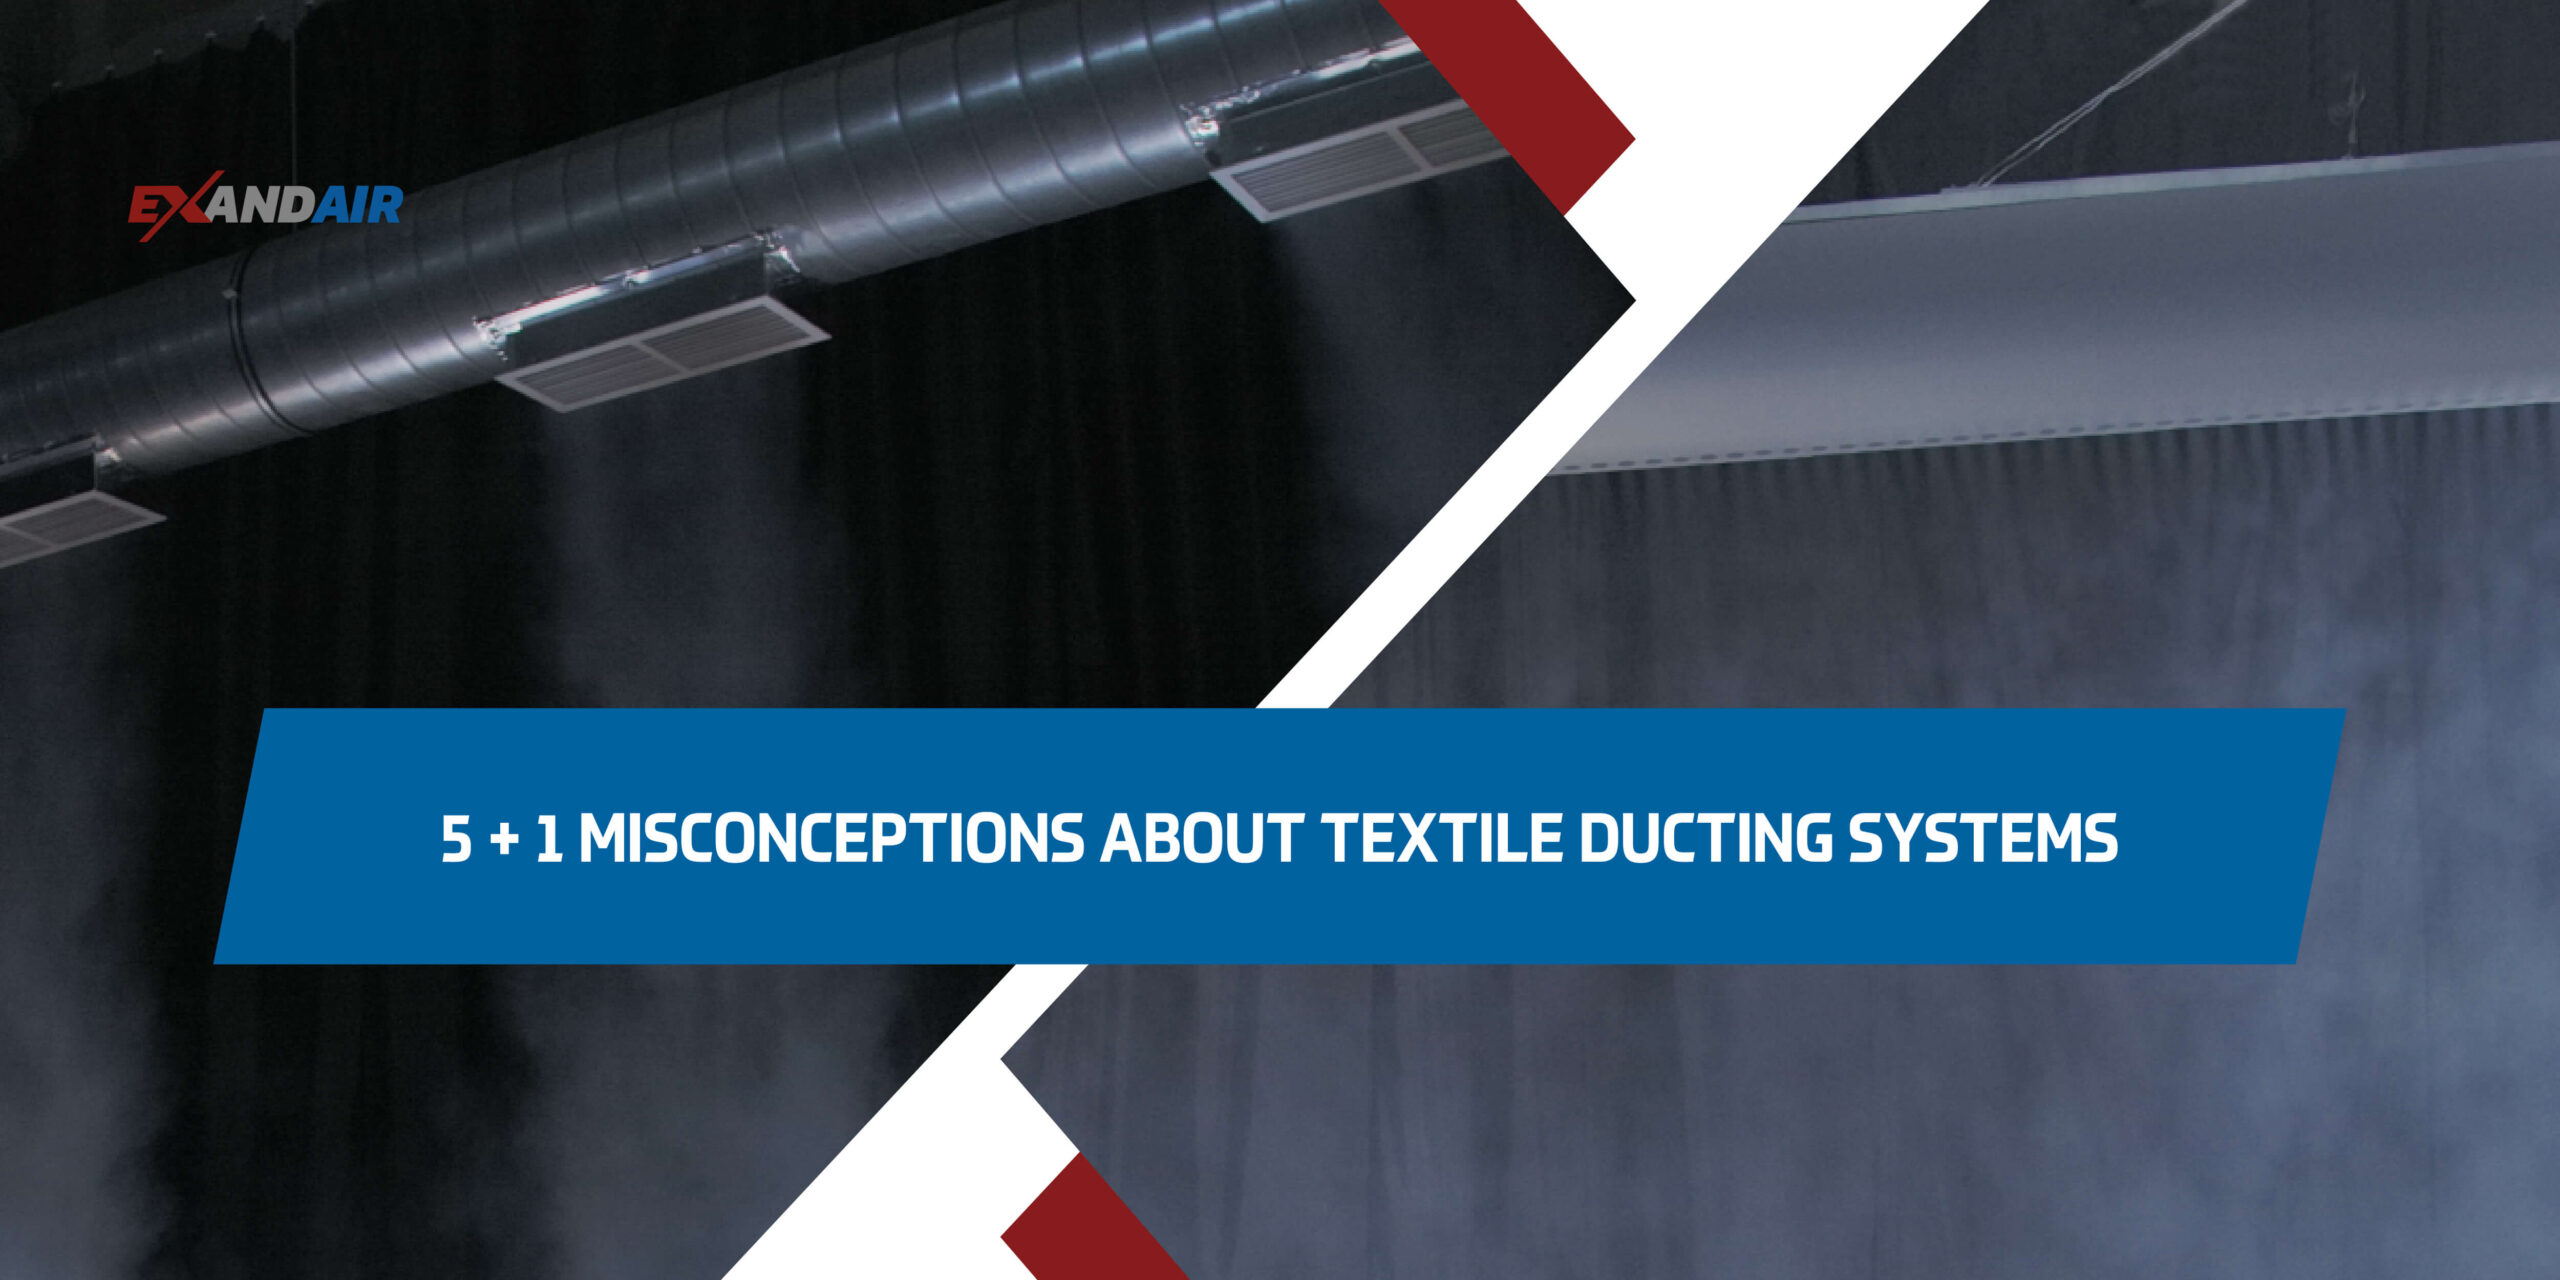 5 + 1 misconceptions about textile ducting systems